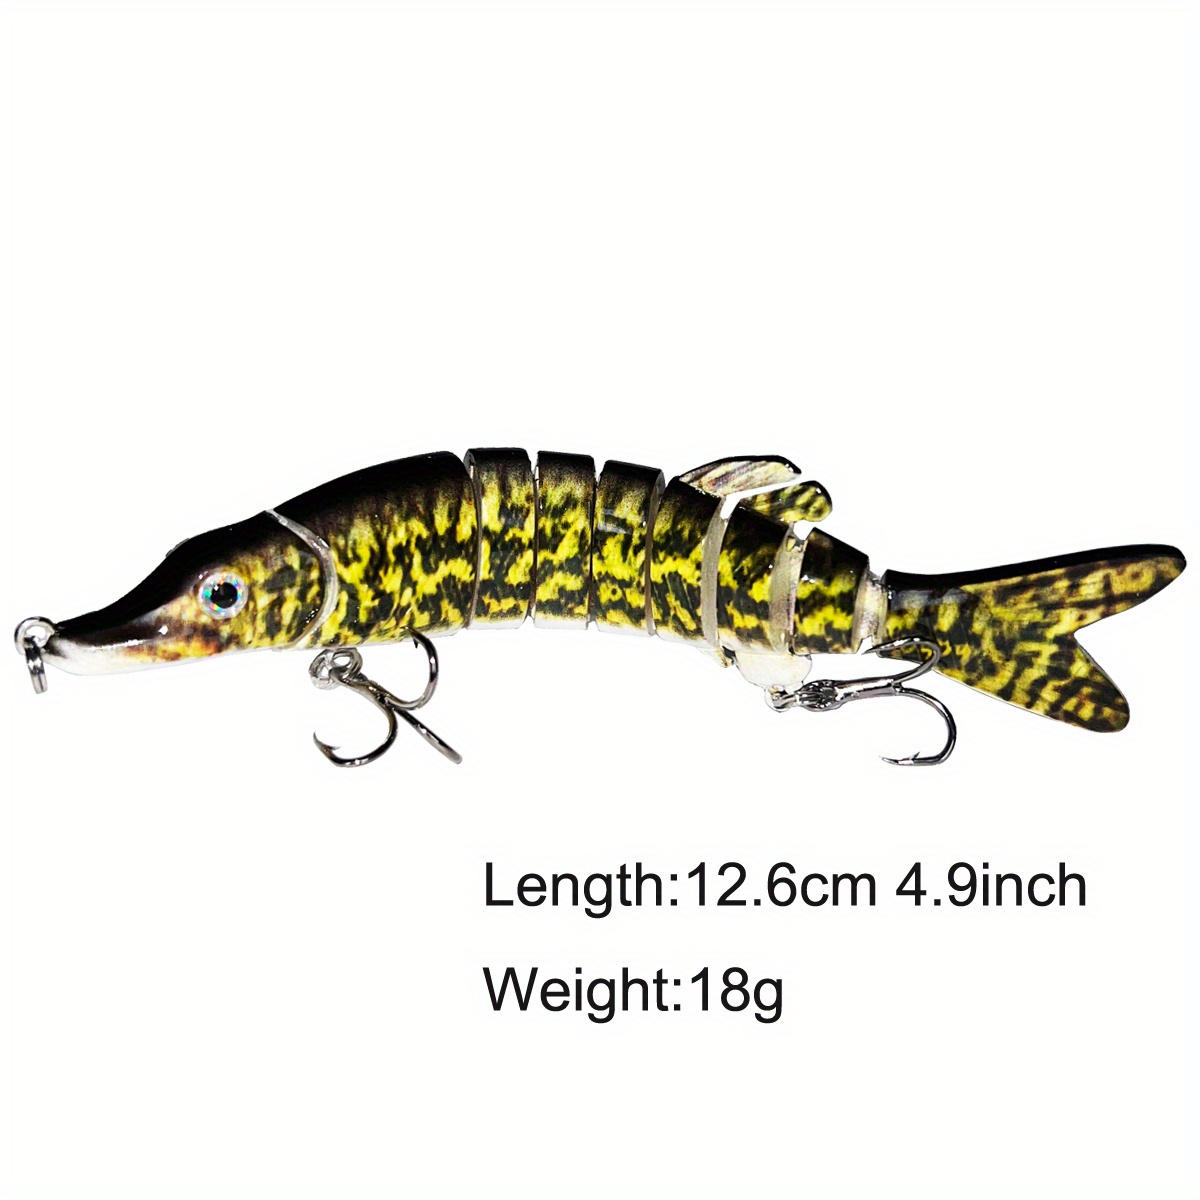 Hansen Stripper SD 6,9 cm 12 g Sinking, Sea Trout Lures, Lures and Baits, Spin Fishing